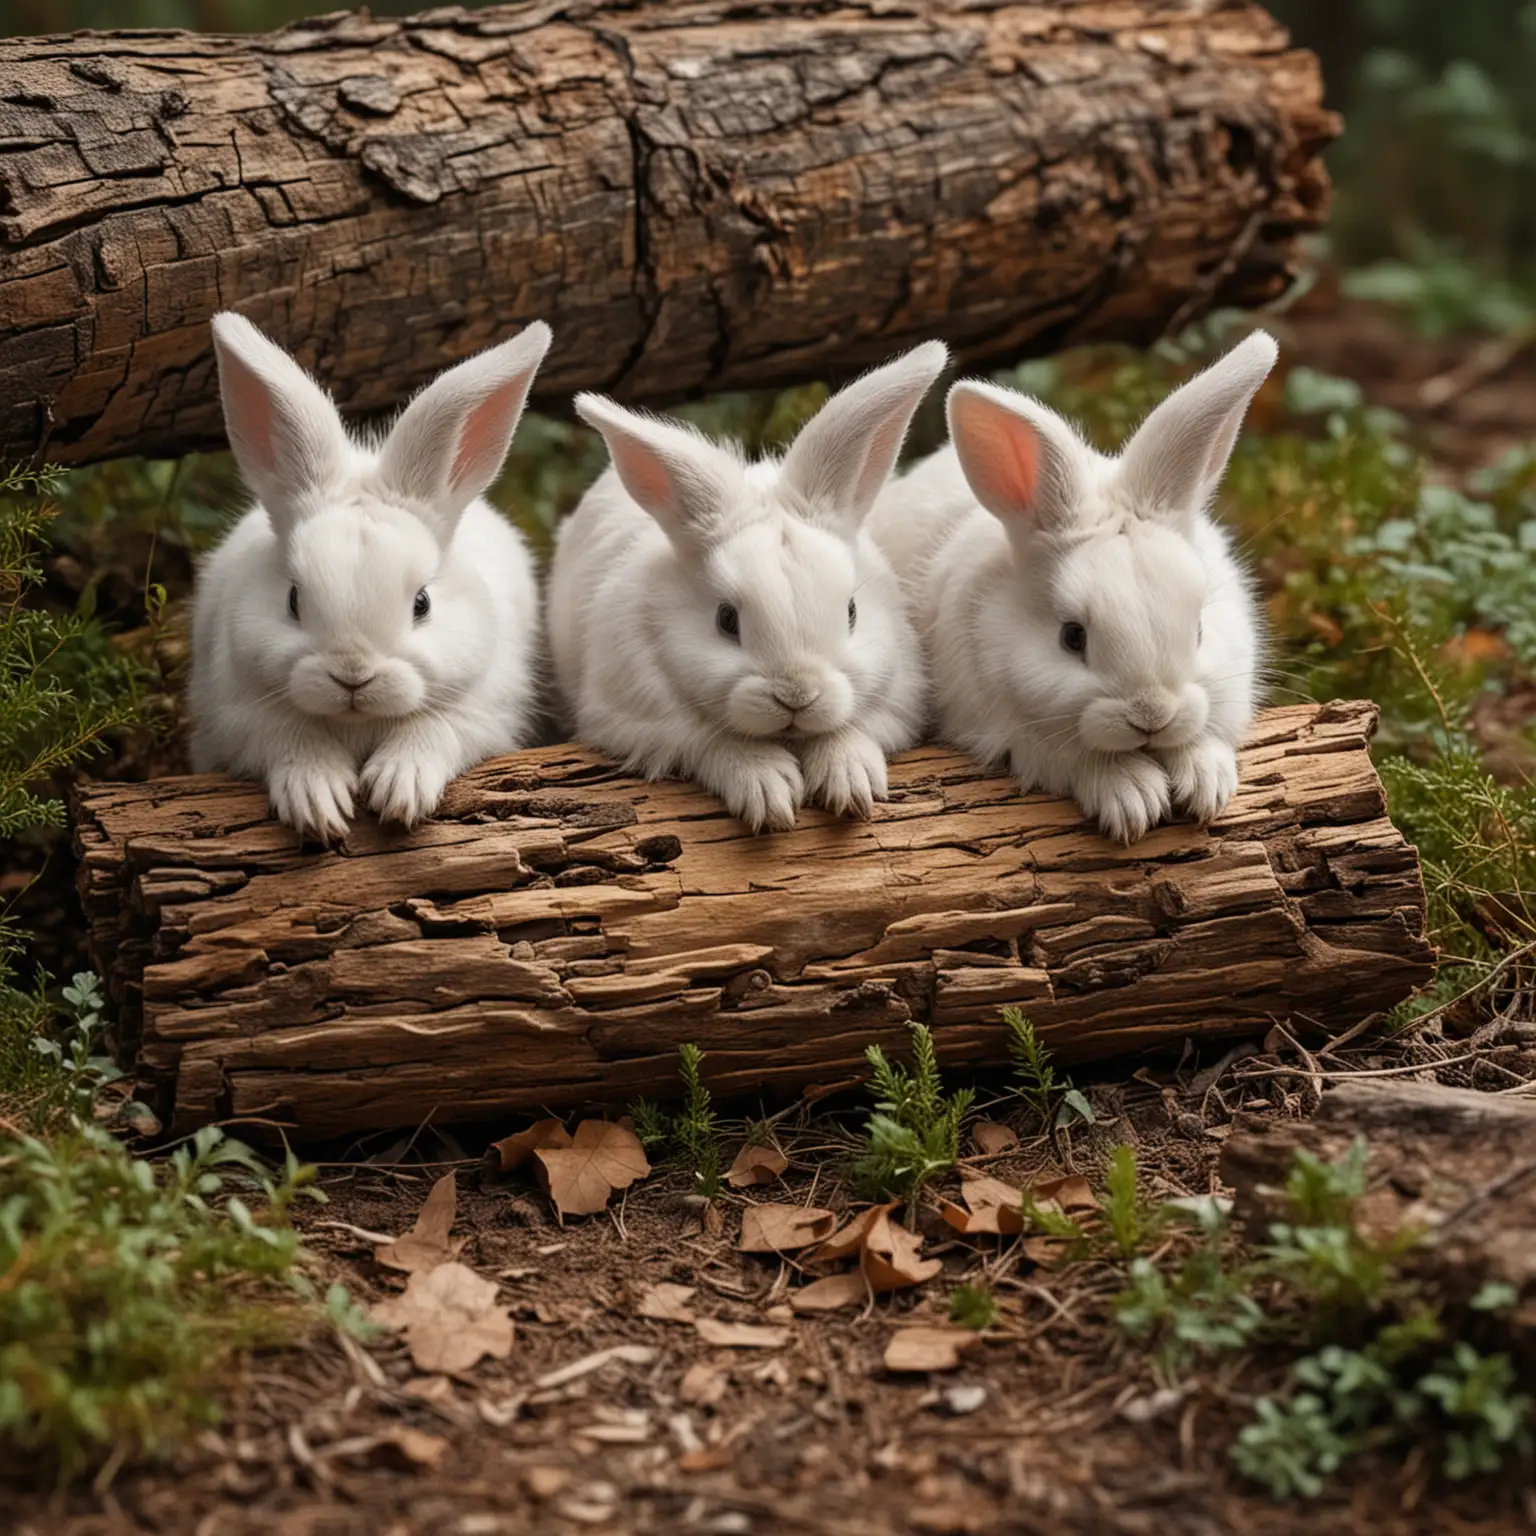 Three Adorable Bunnies Sleeping Peacefully in a Forest Clearing